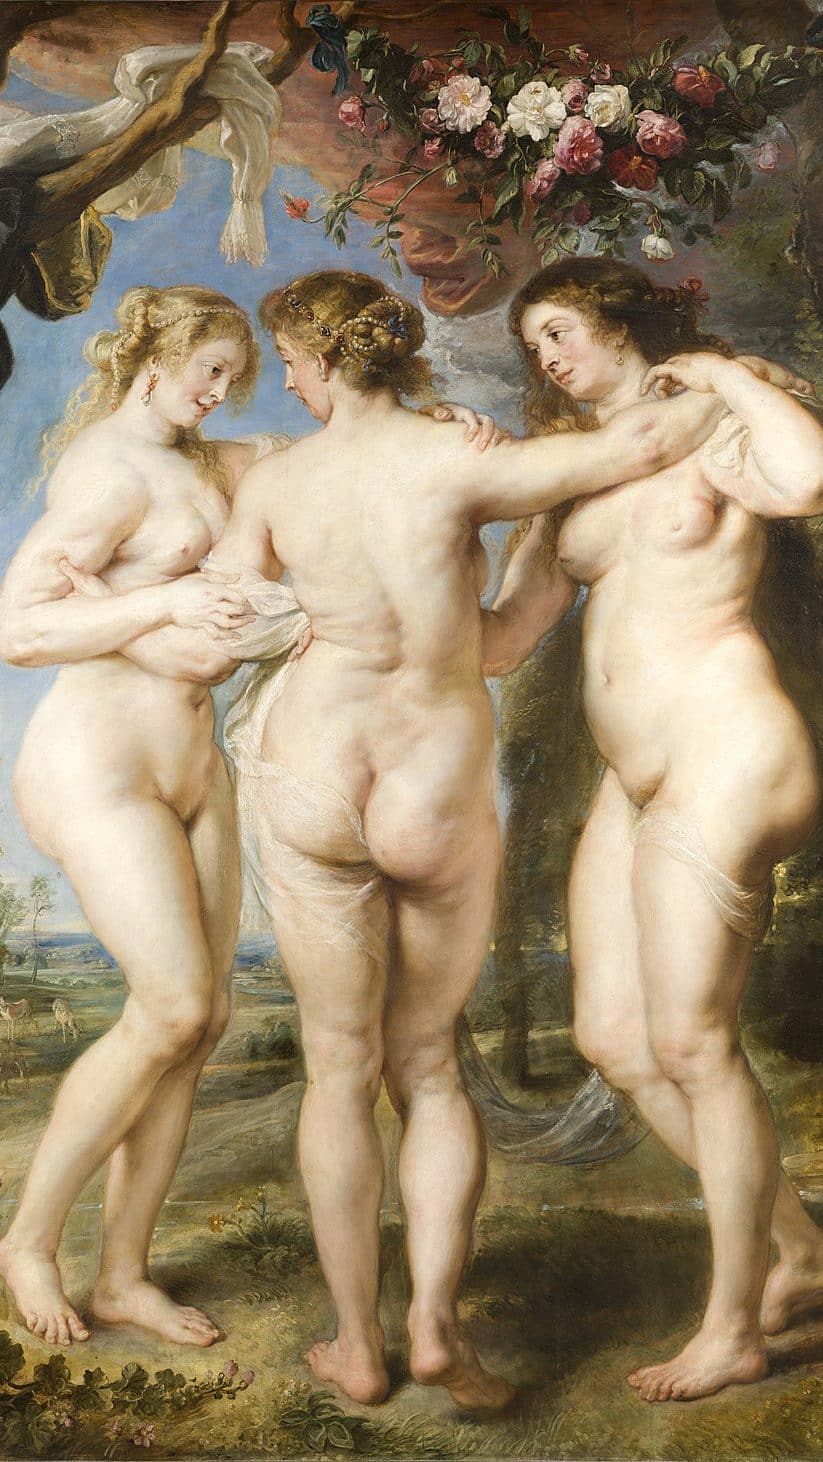 "The Three Graces" by Rubens